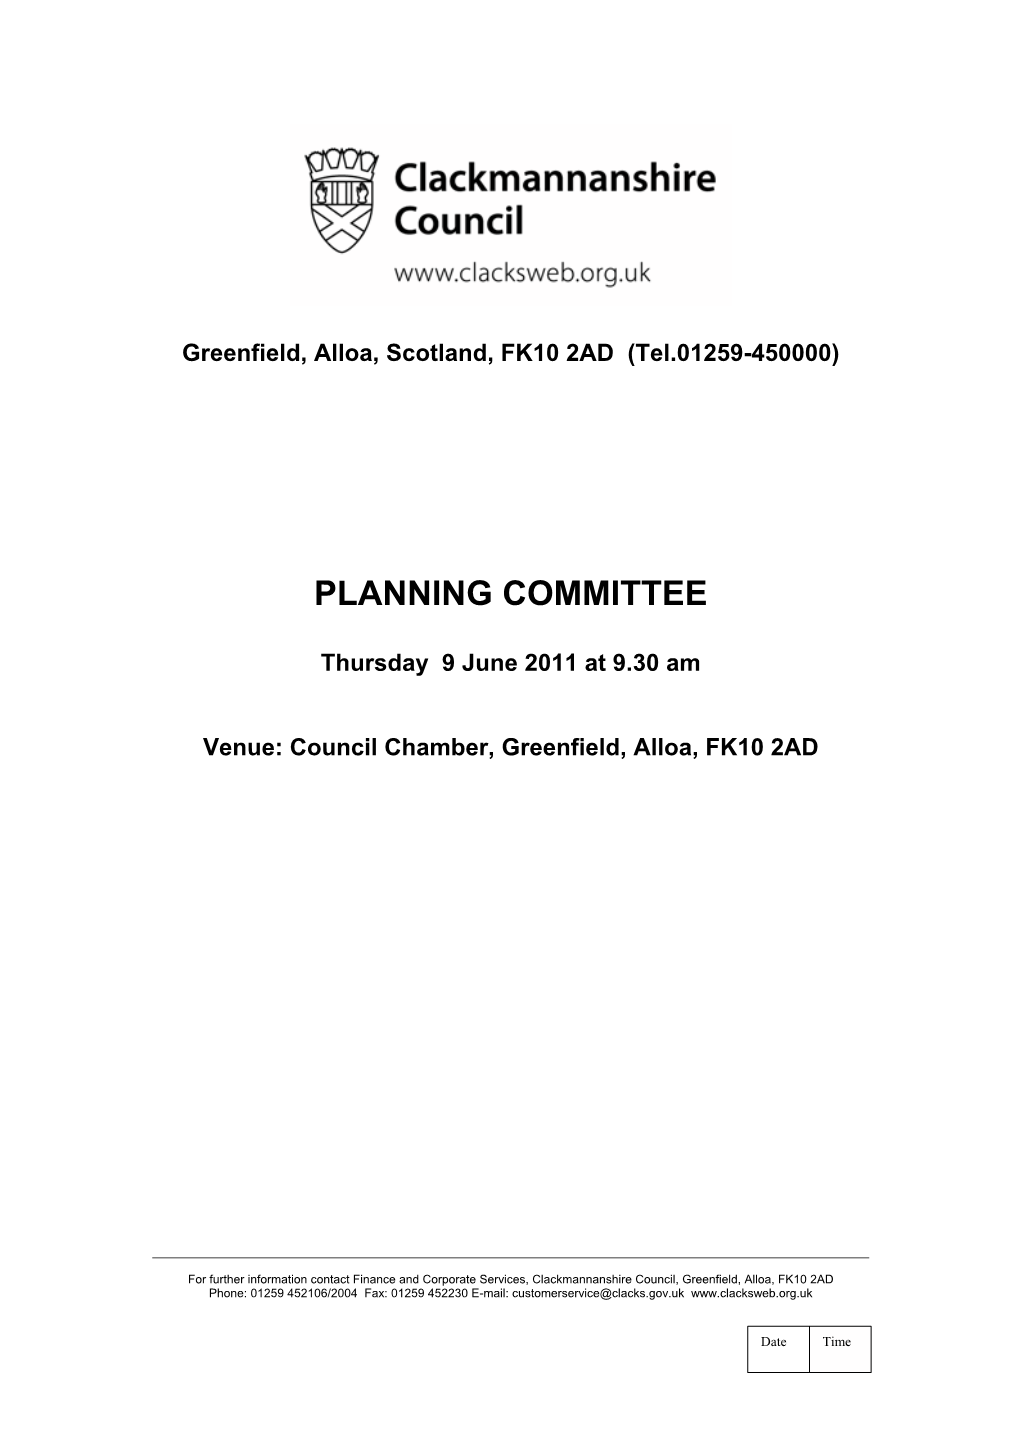 Planning Committee